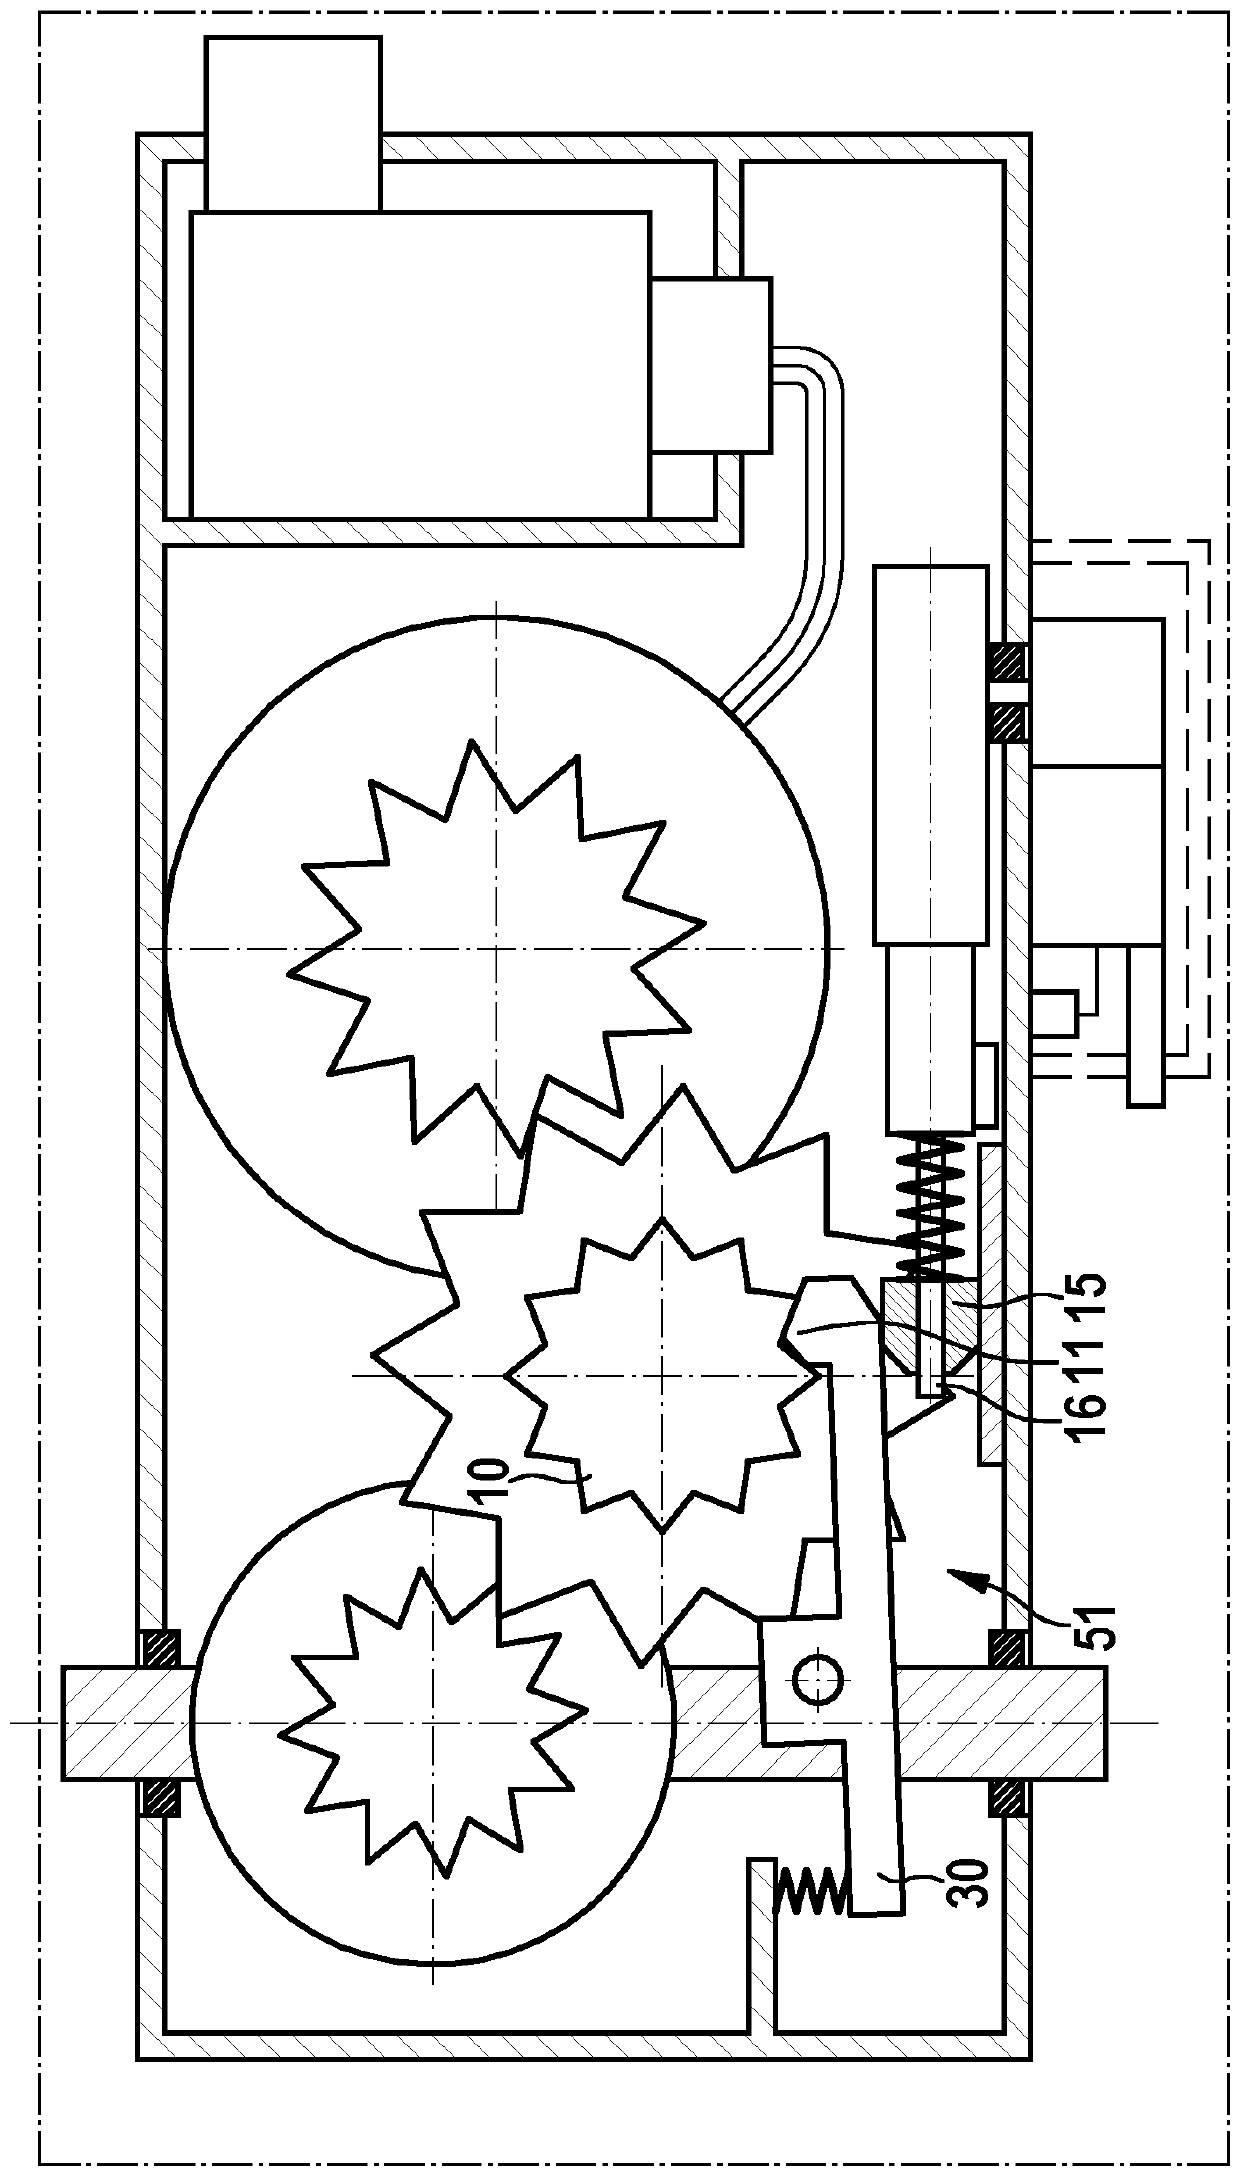 Device for blocking a transmission